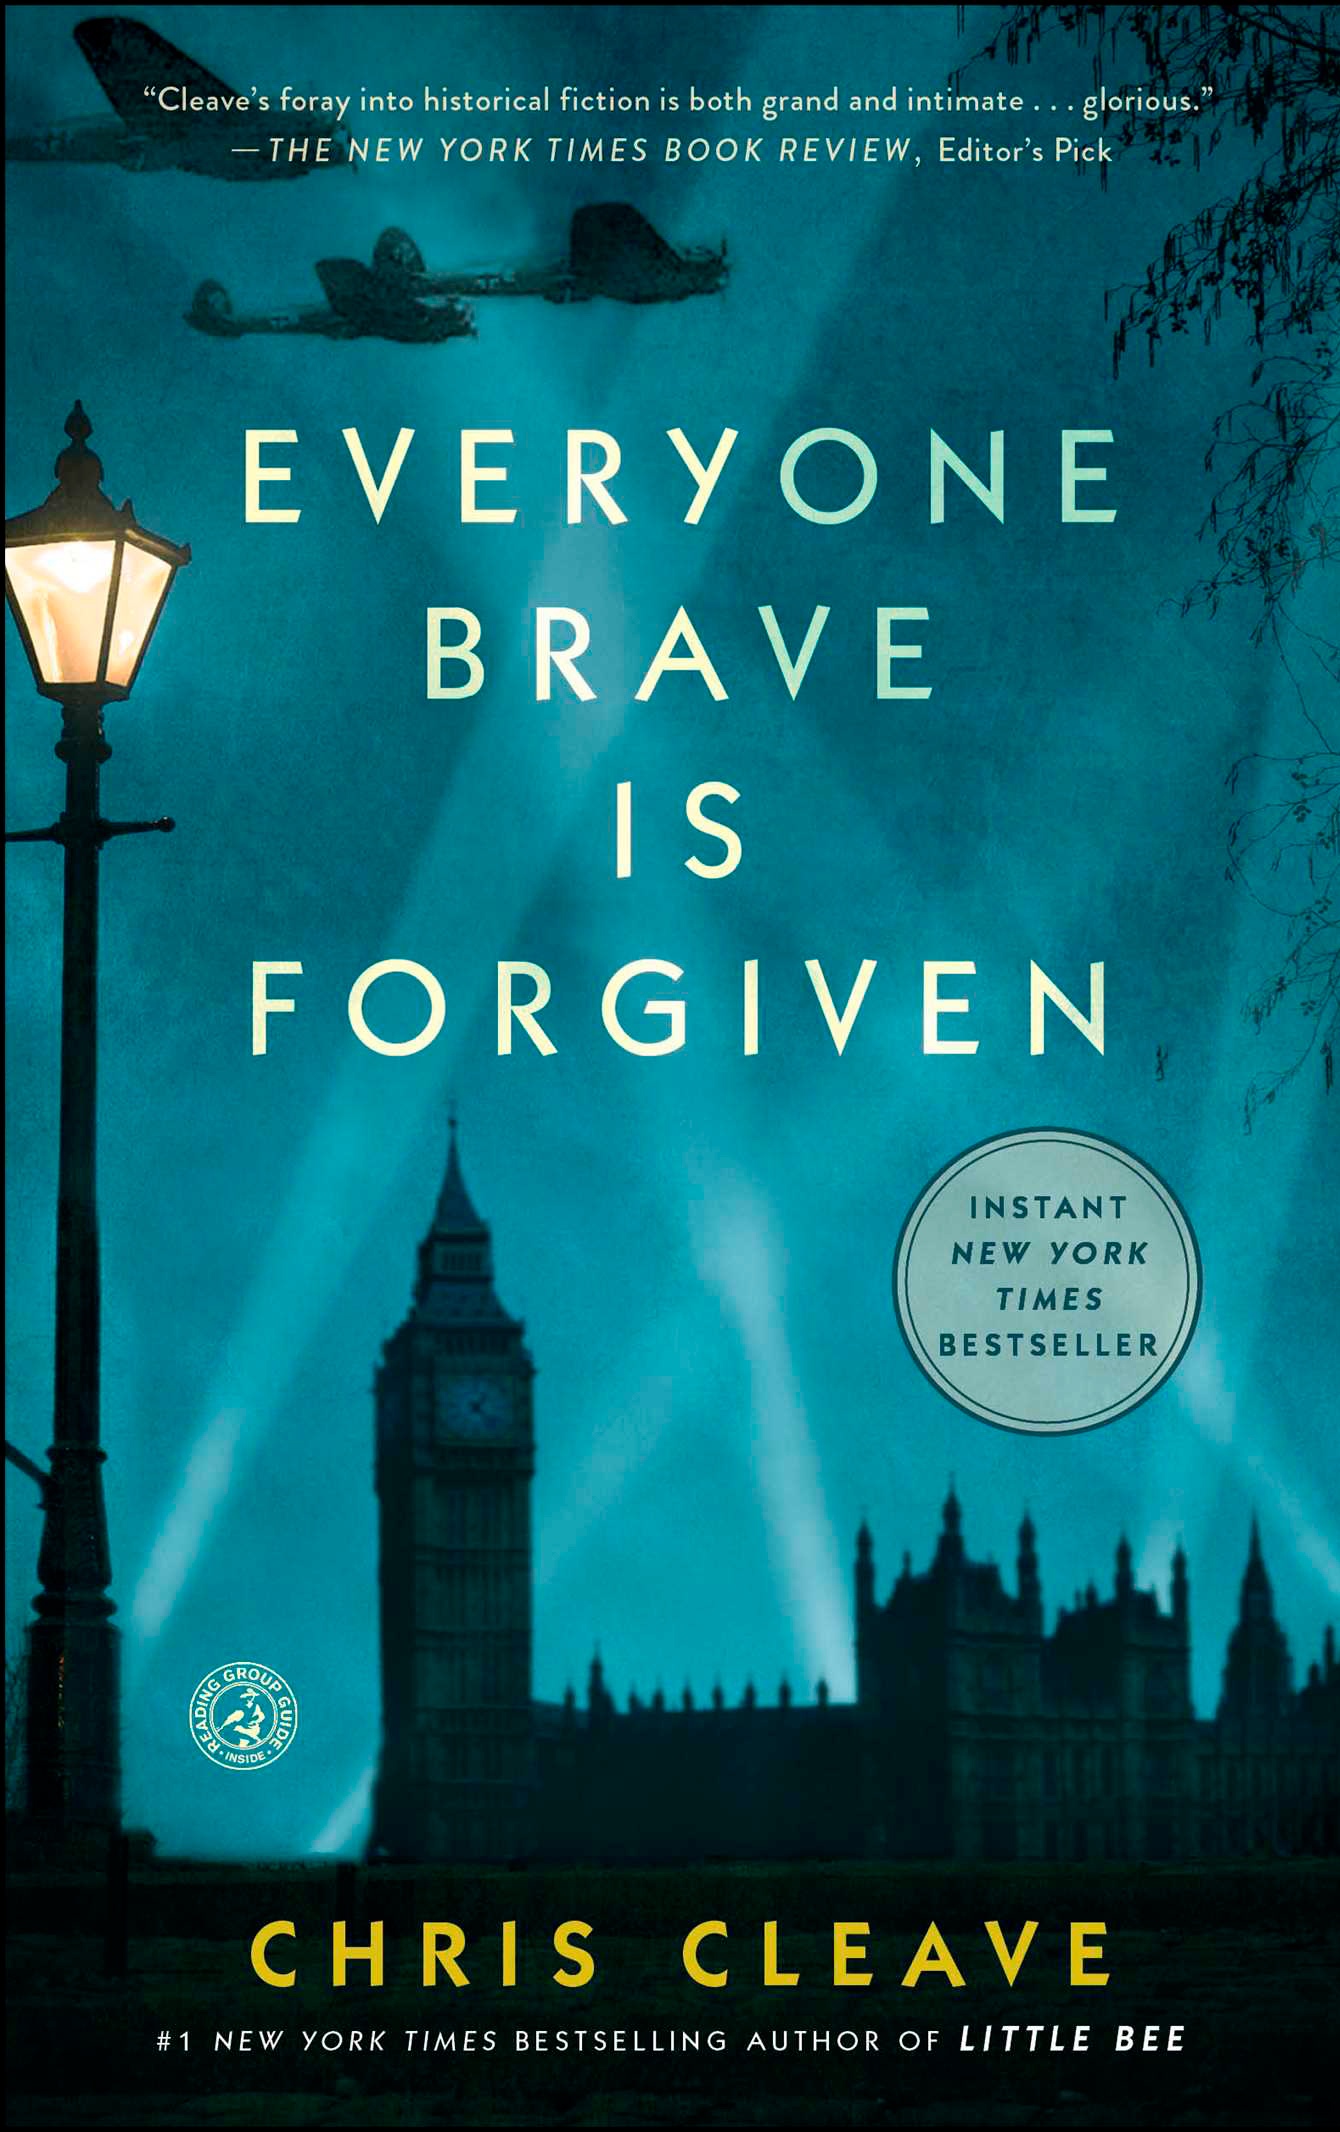 Chris Cleave – Everyone Brave Is Forgiven